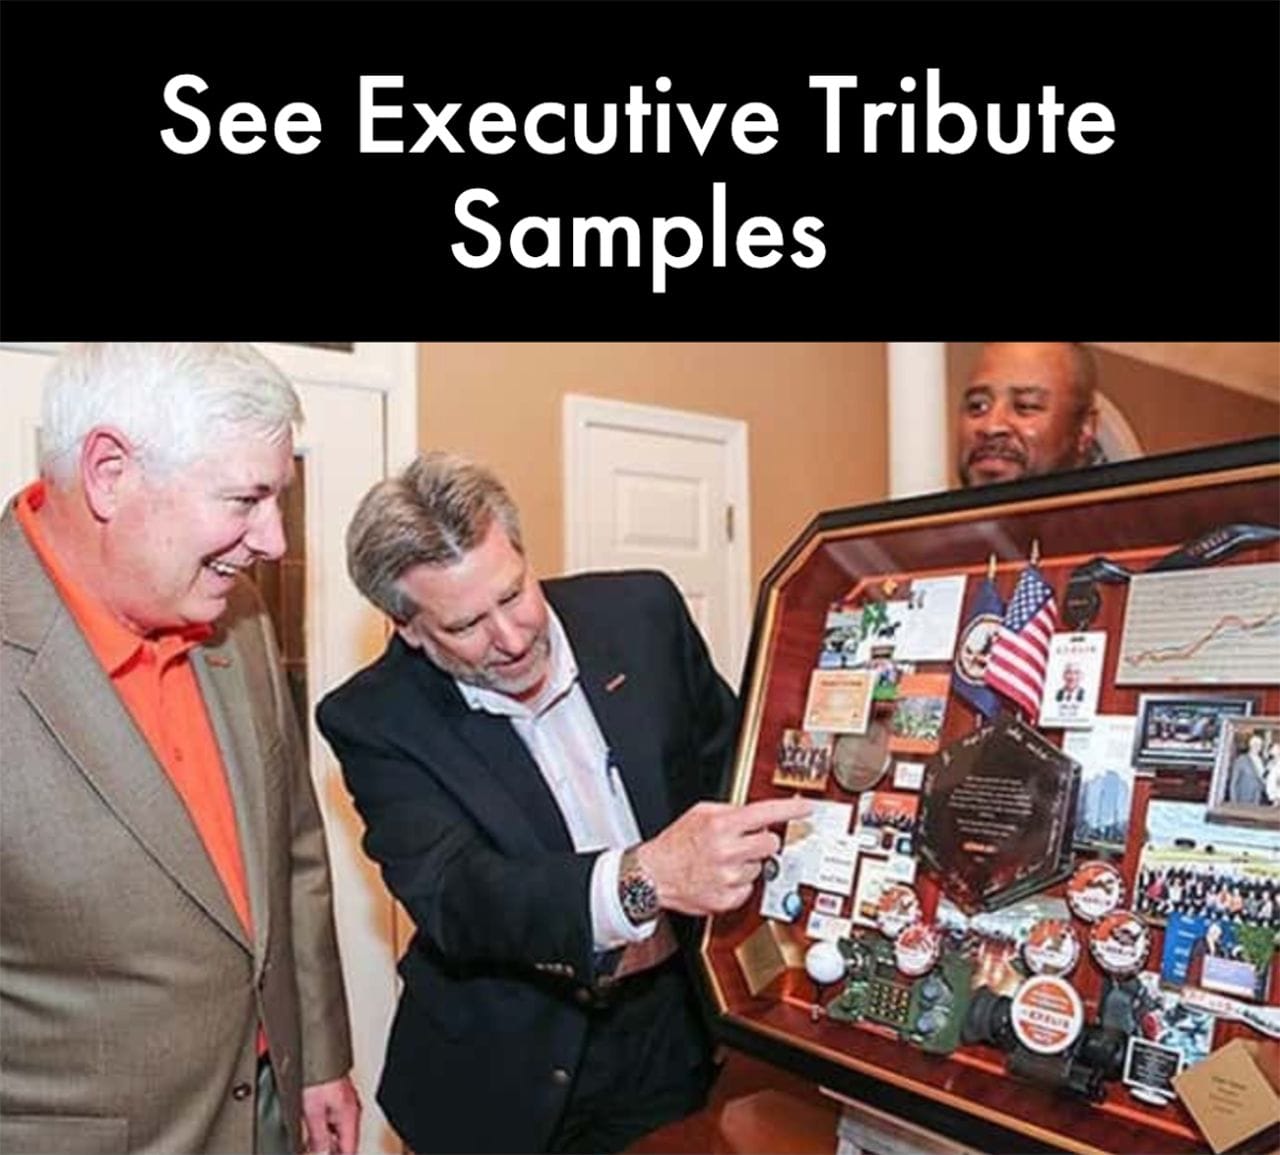 See Executive Tribute Samples